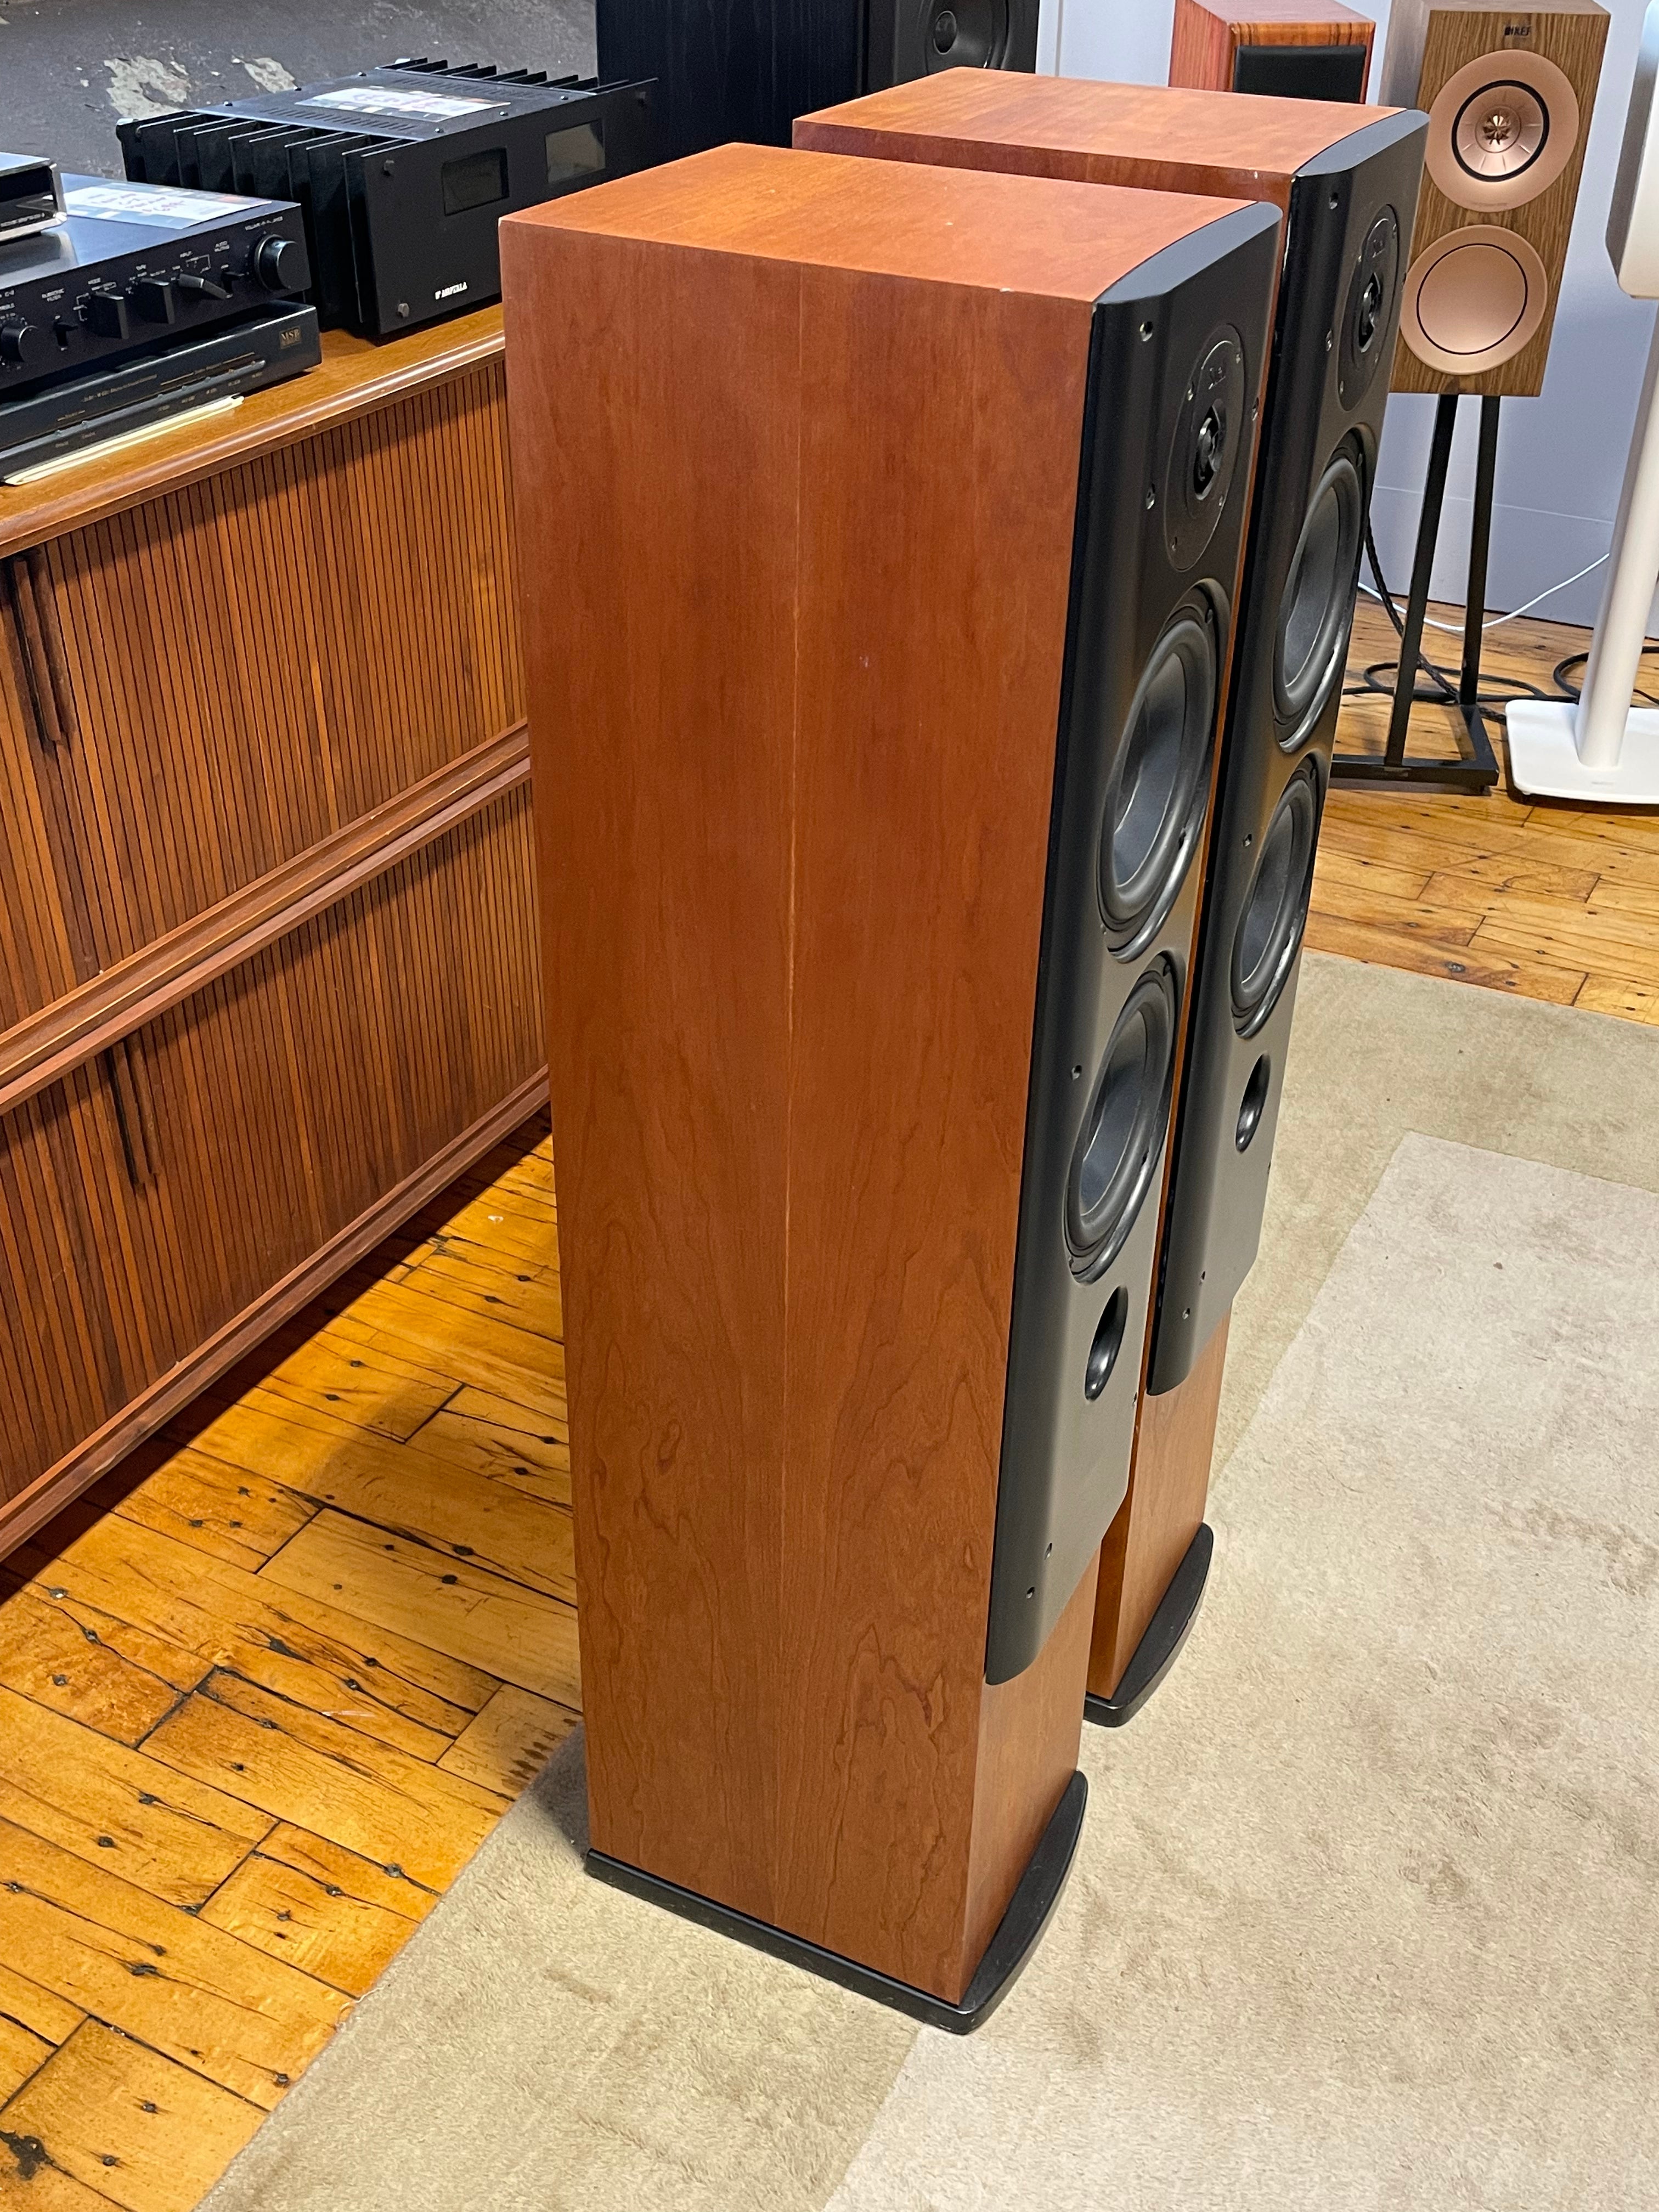 Snell Acoustics E.5 MkII Towers - SOLD